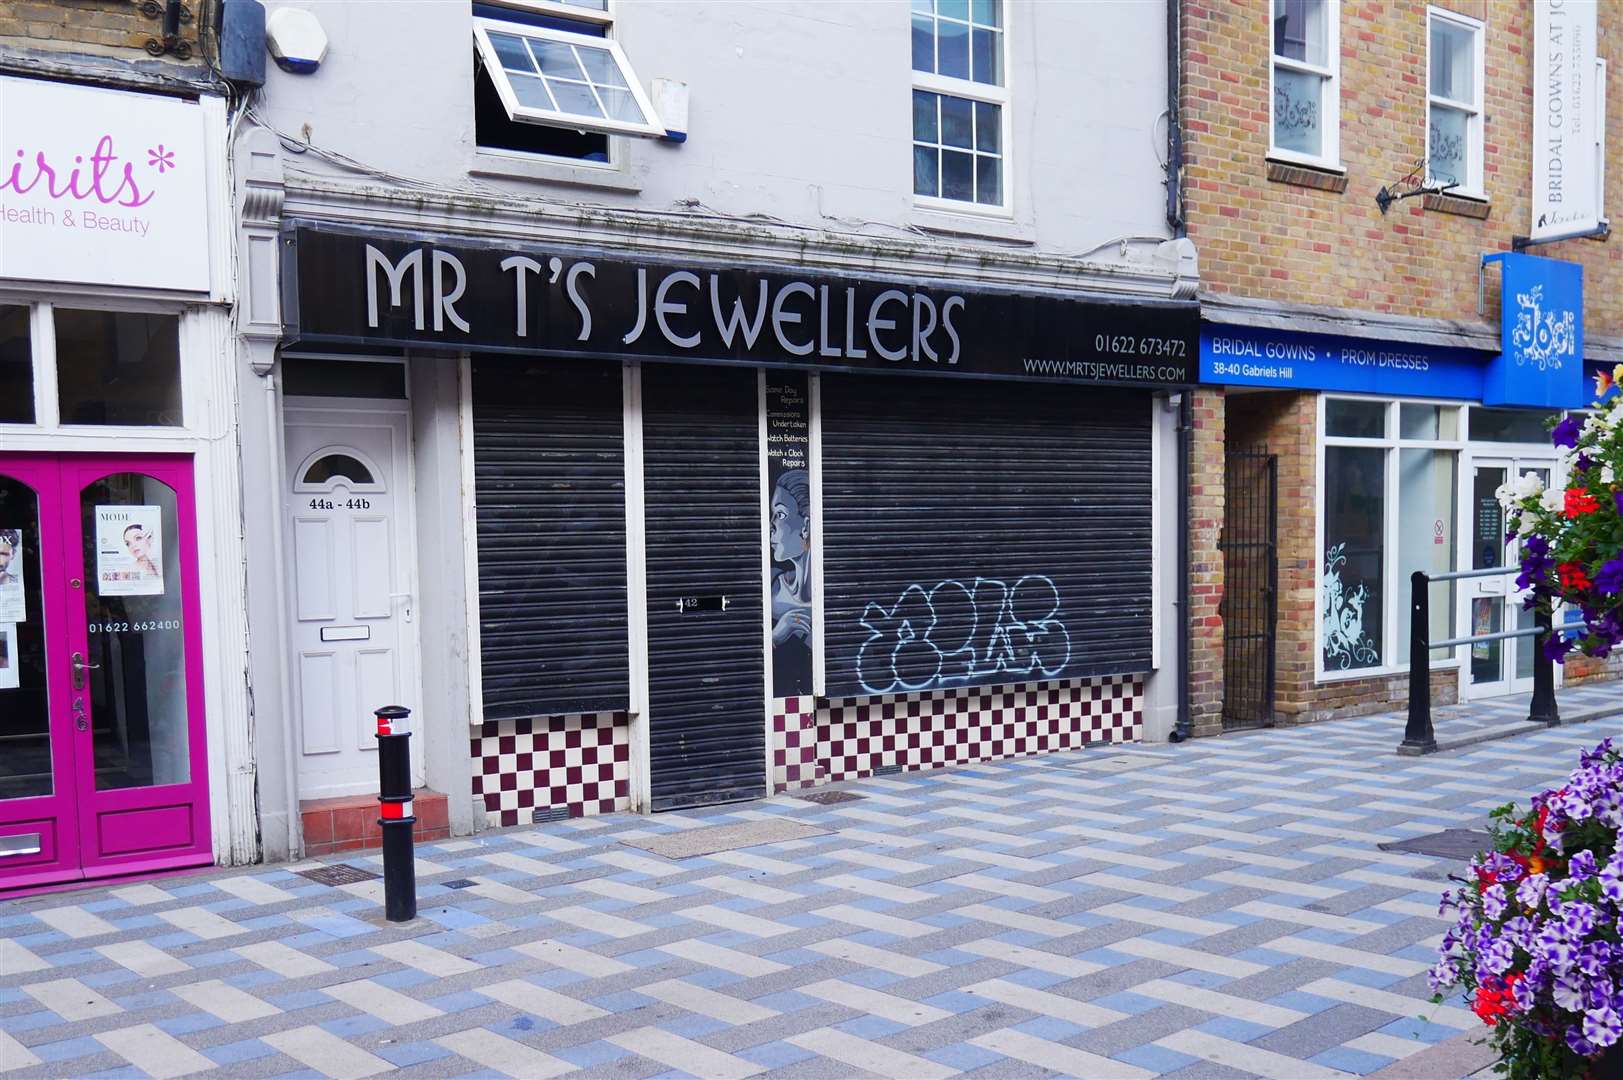 Mr T’s jewellers has been on the street for 23 years